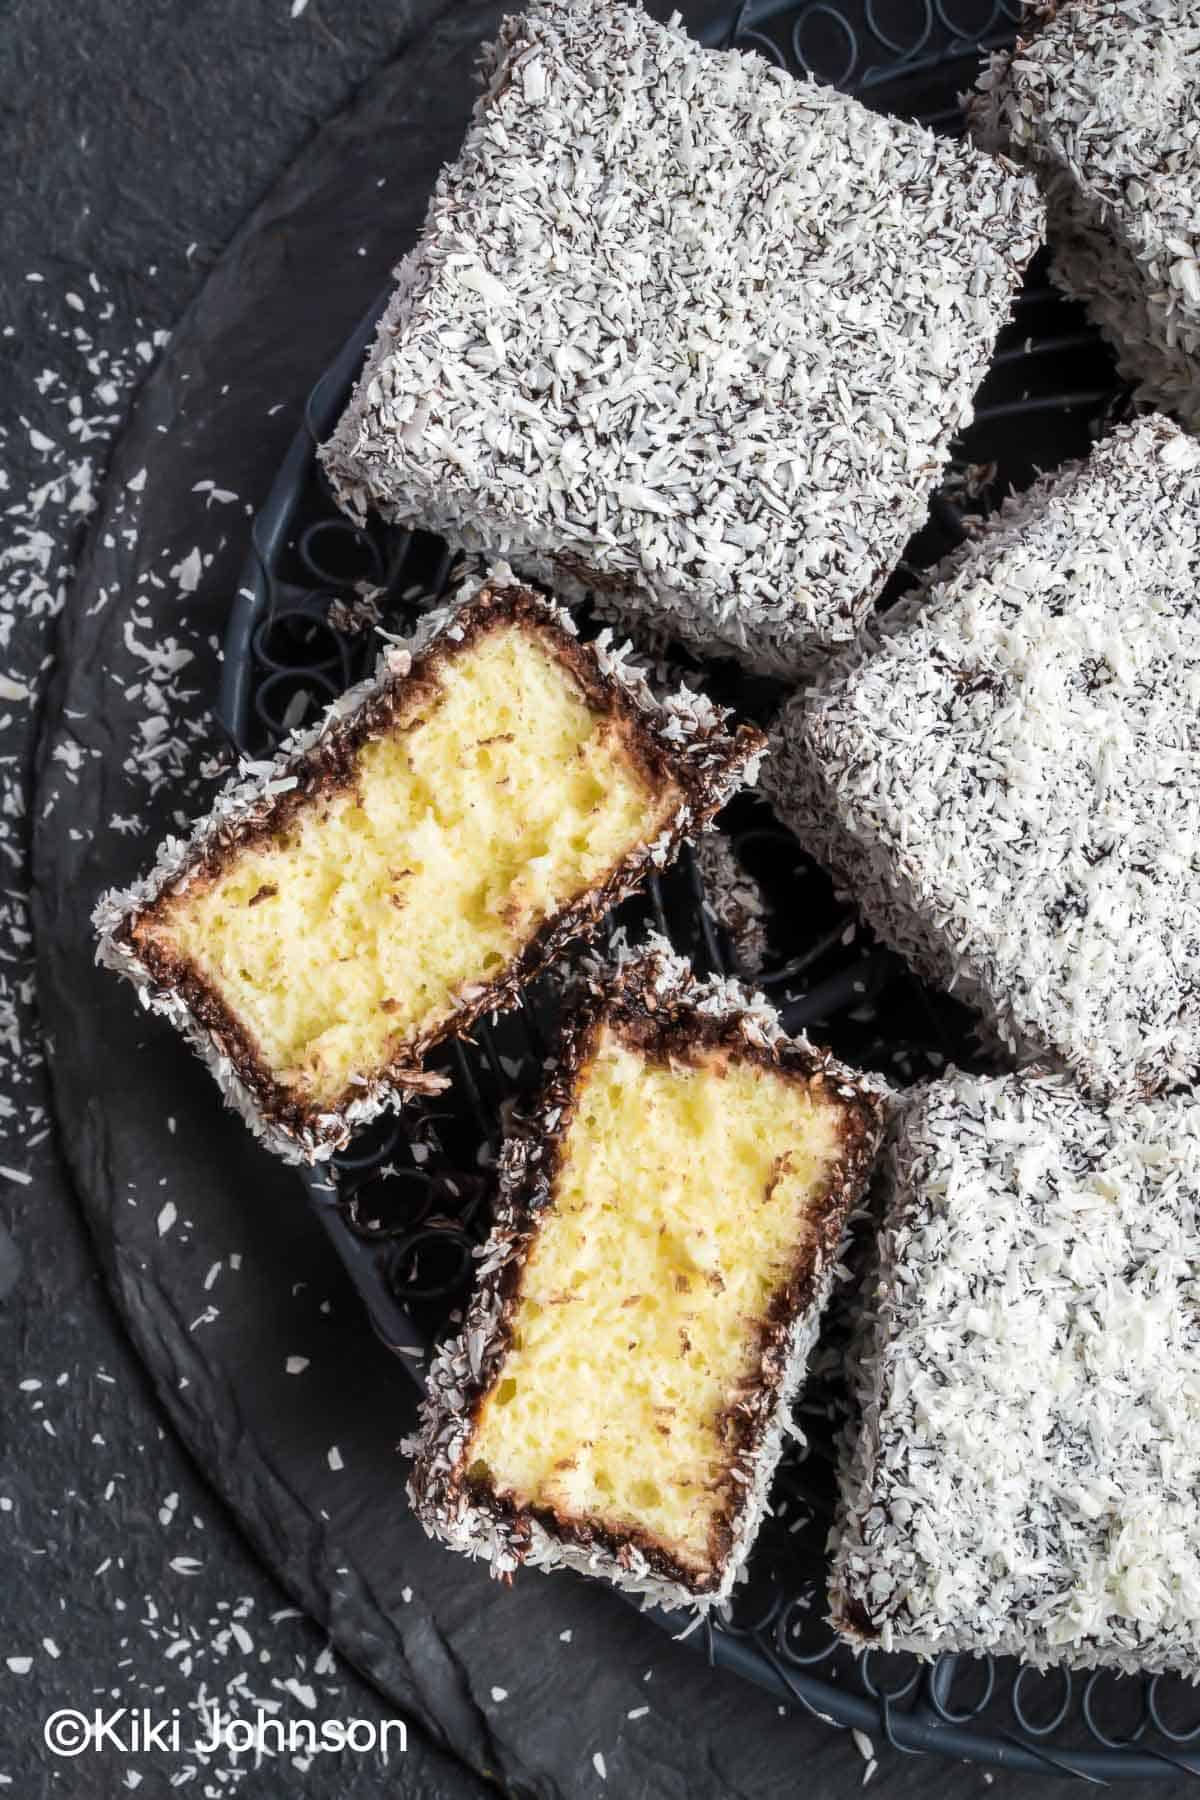 Croatian Cupavci  - Sponge cakes soaked in chocolate sauce, then dipped in unsweetened, shredded coconut